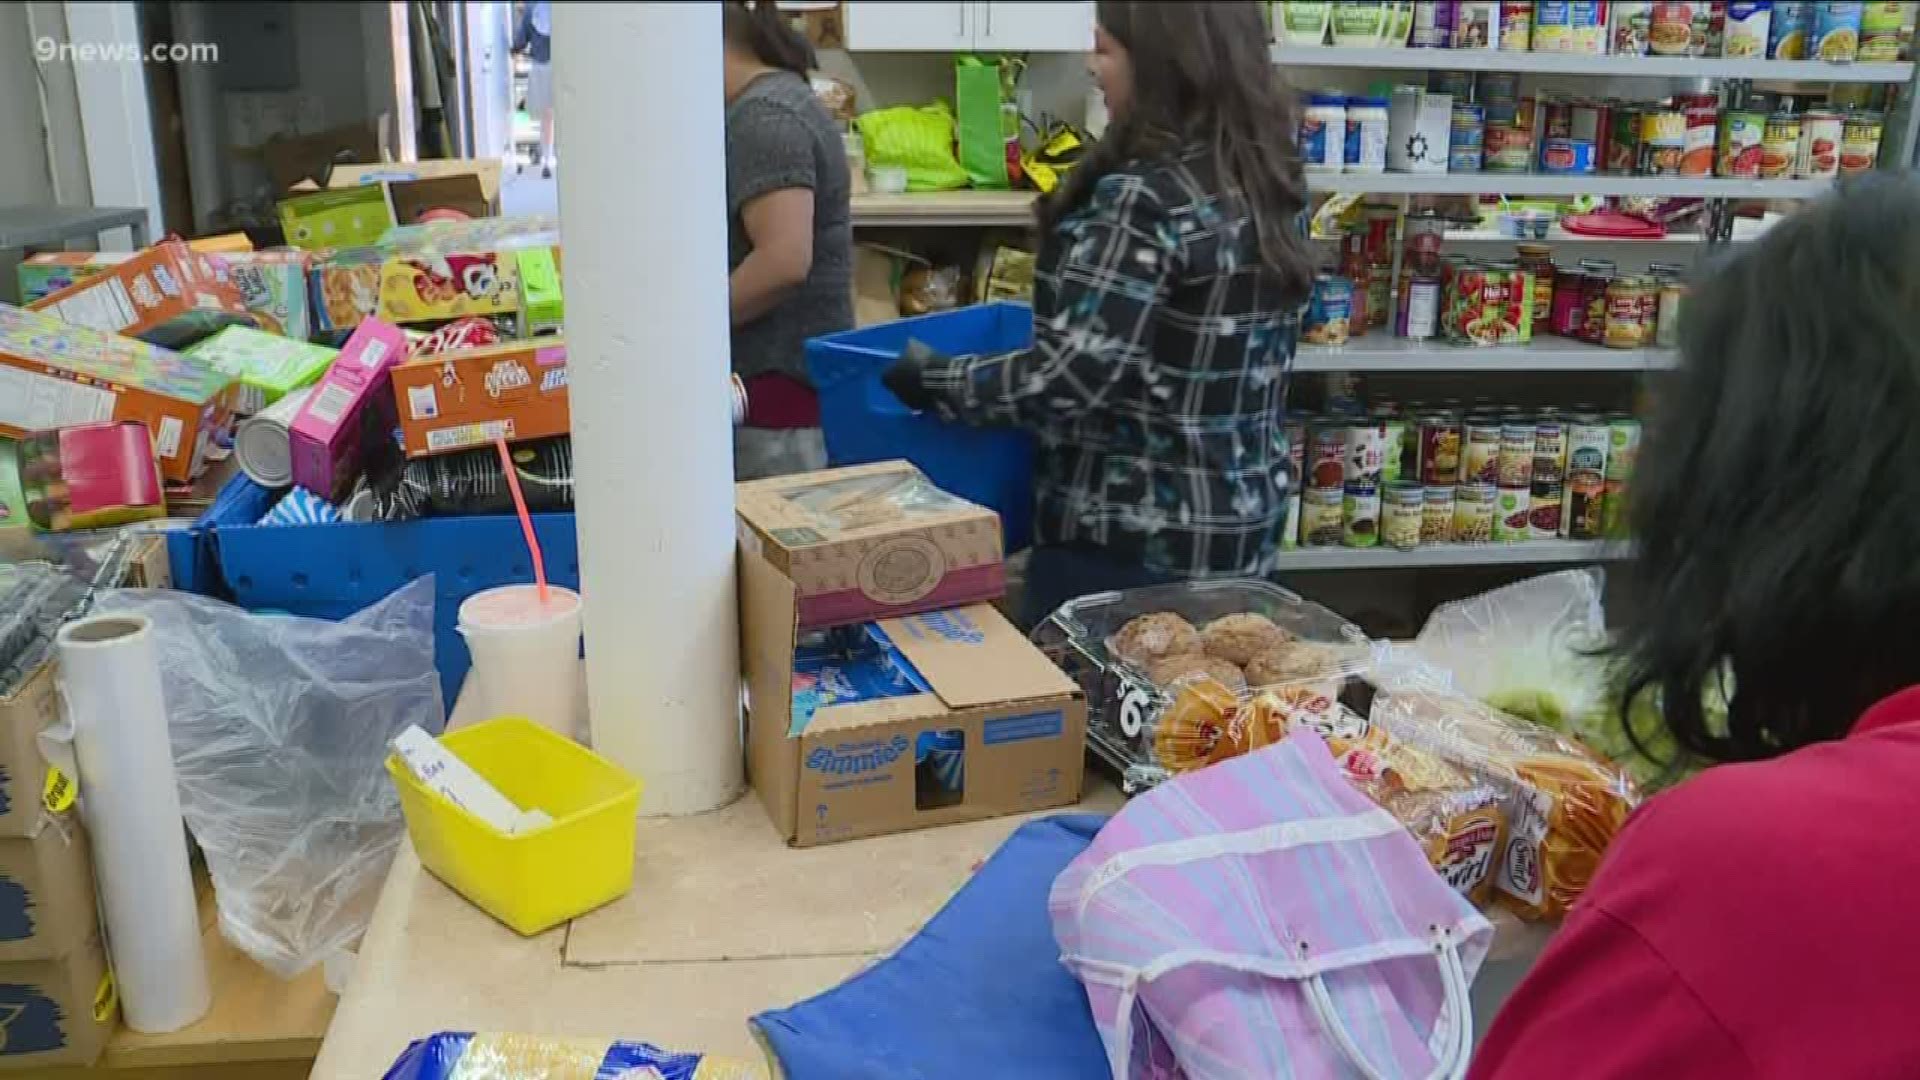 It's Colorado Gives Day, the biggest one-day of giving in the state. More than $35.3 million was raised last year.